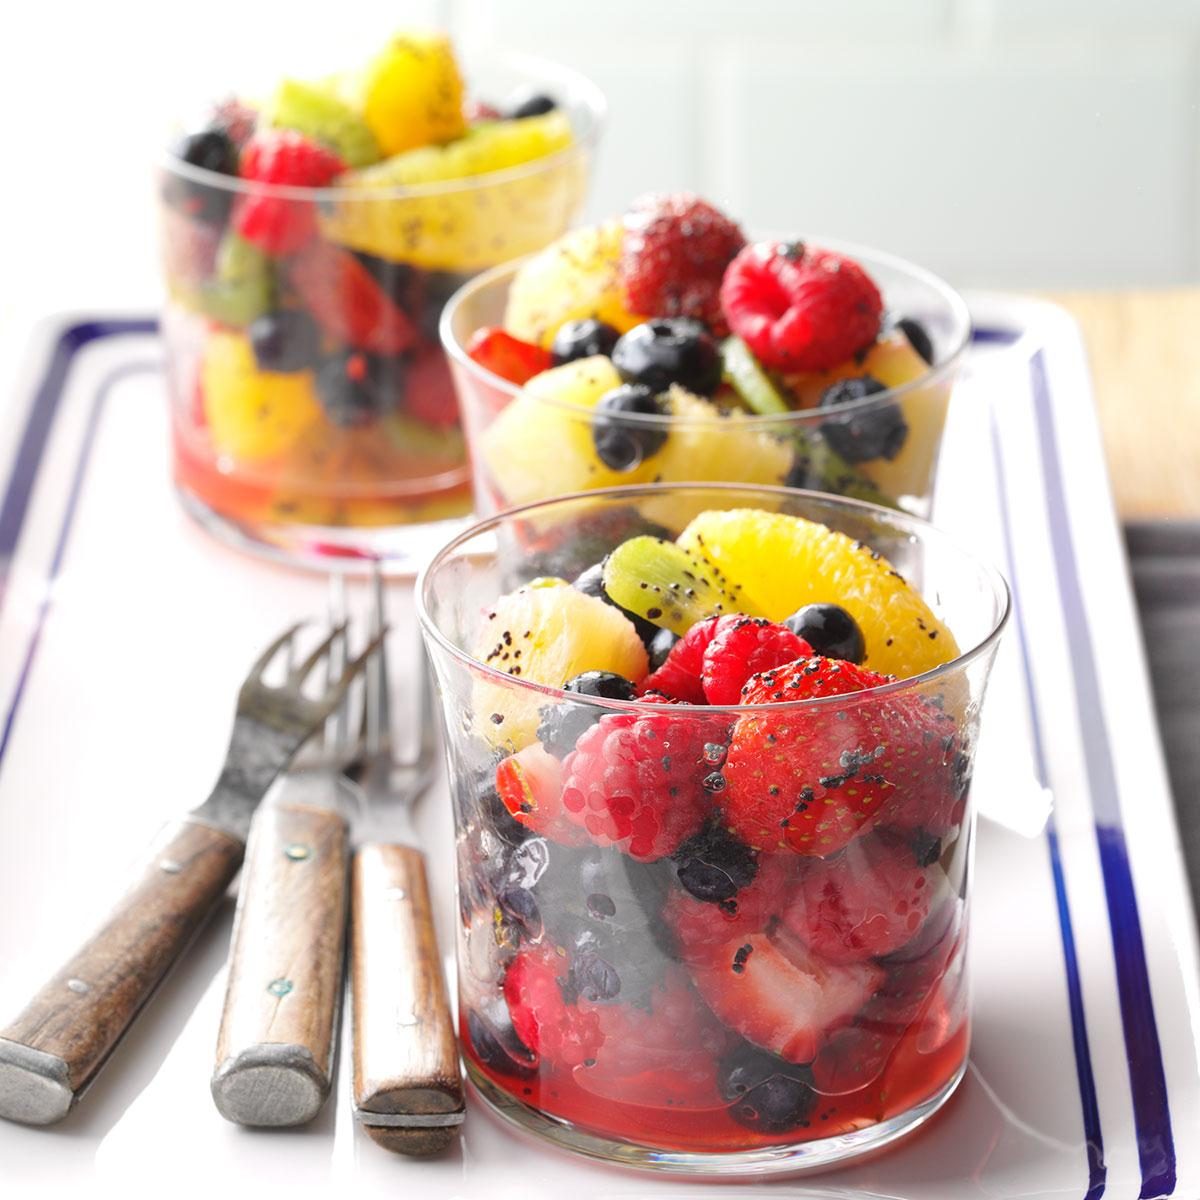 The 8 Best Fruit Bowls of 2023